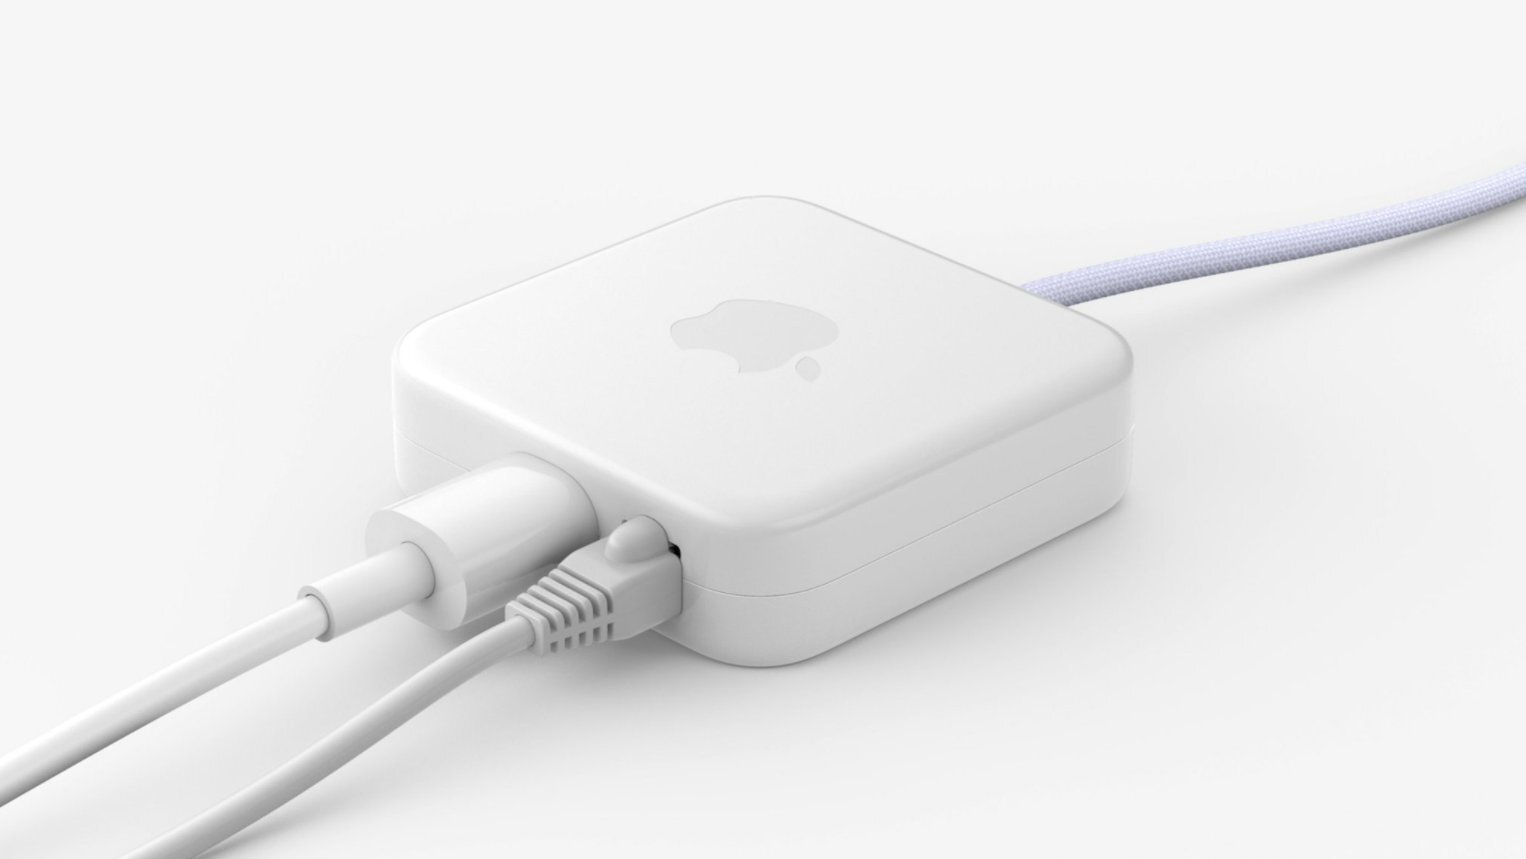 Apple's new iMac features power adapter with built-in ethernet port